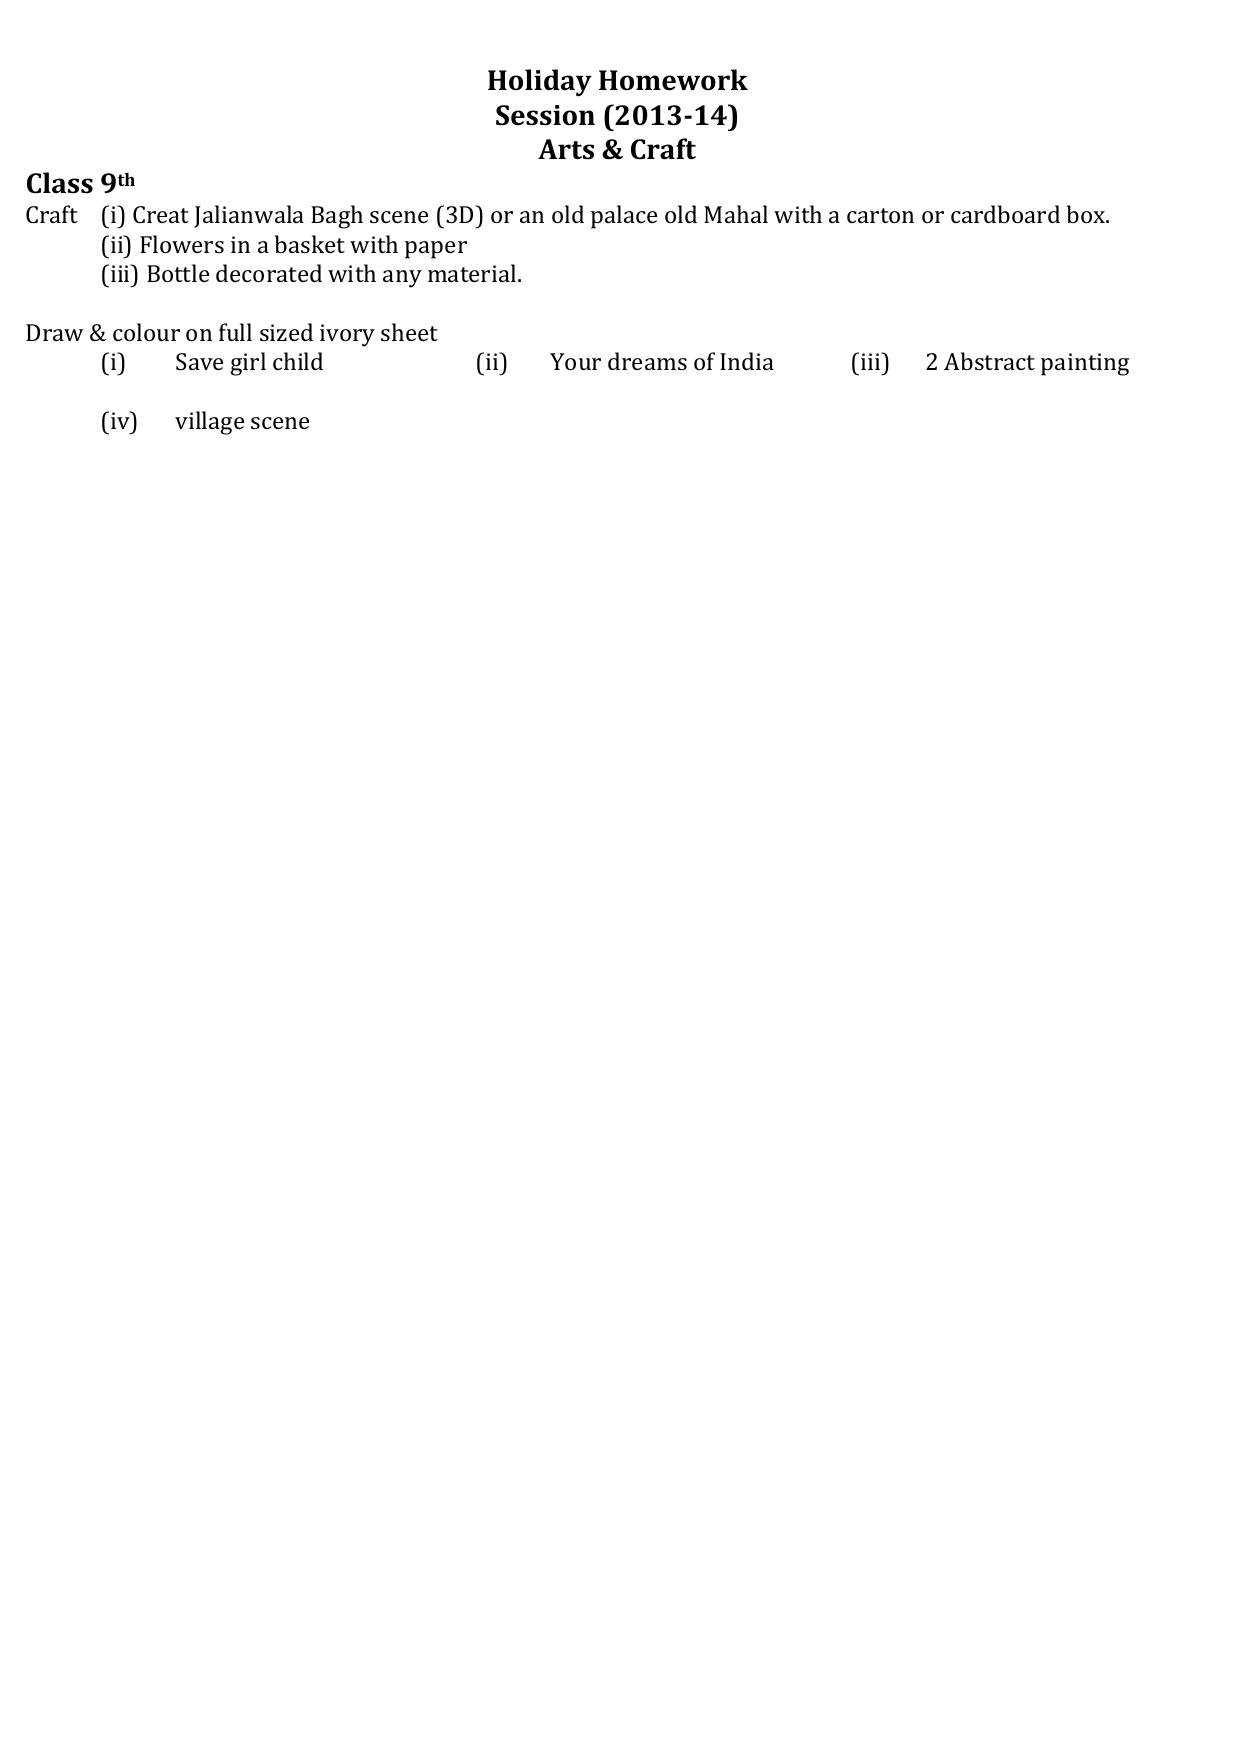 CBSE Worksheets for Class 9 Assignment 3 - Page 8